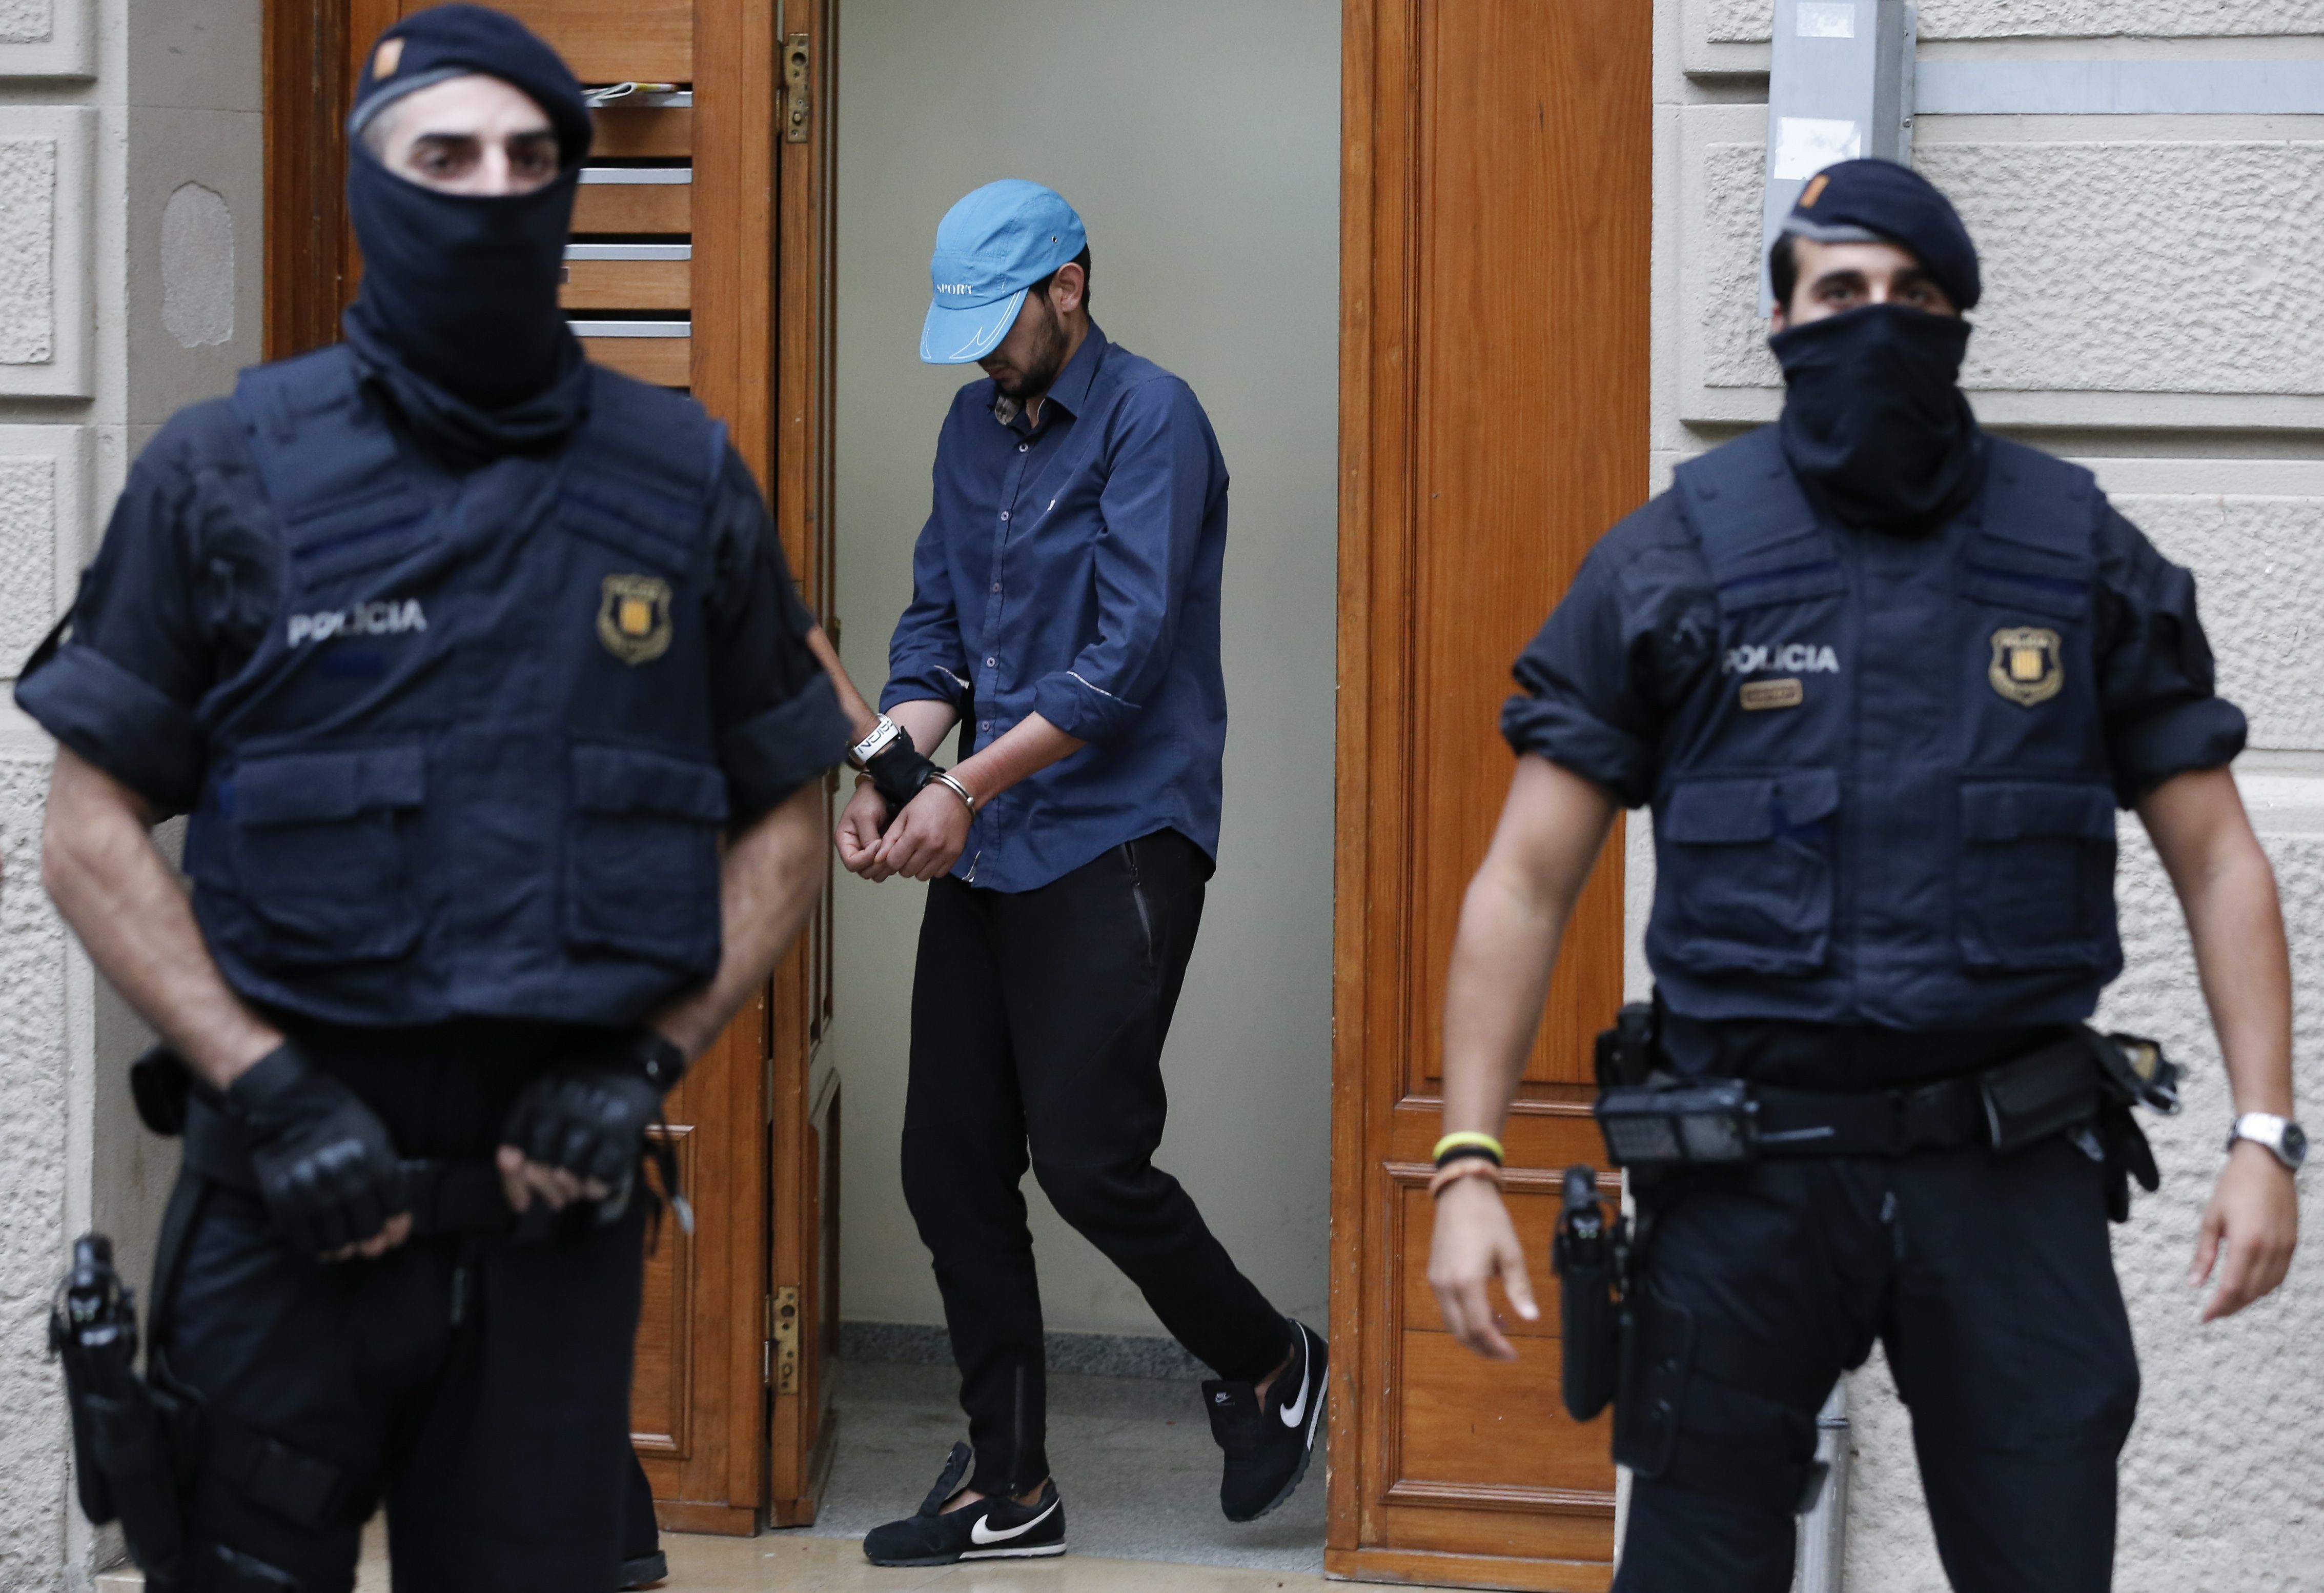 Catalan autonomous police officers detain a cuffed suspect in Ripoll during a search linked to the deadly terror attacks in Barcelona and the seaside resort of Cambrils on August 18. Photo: AFP